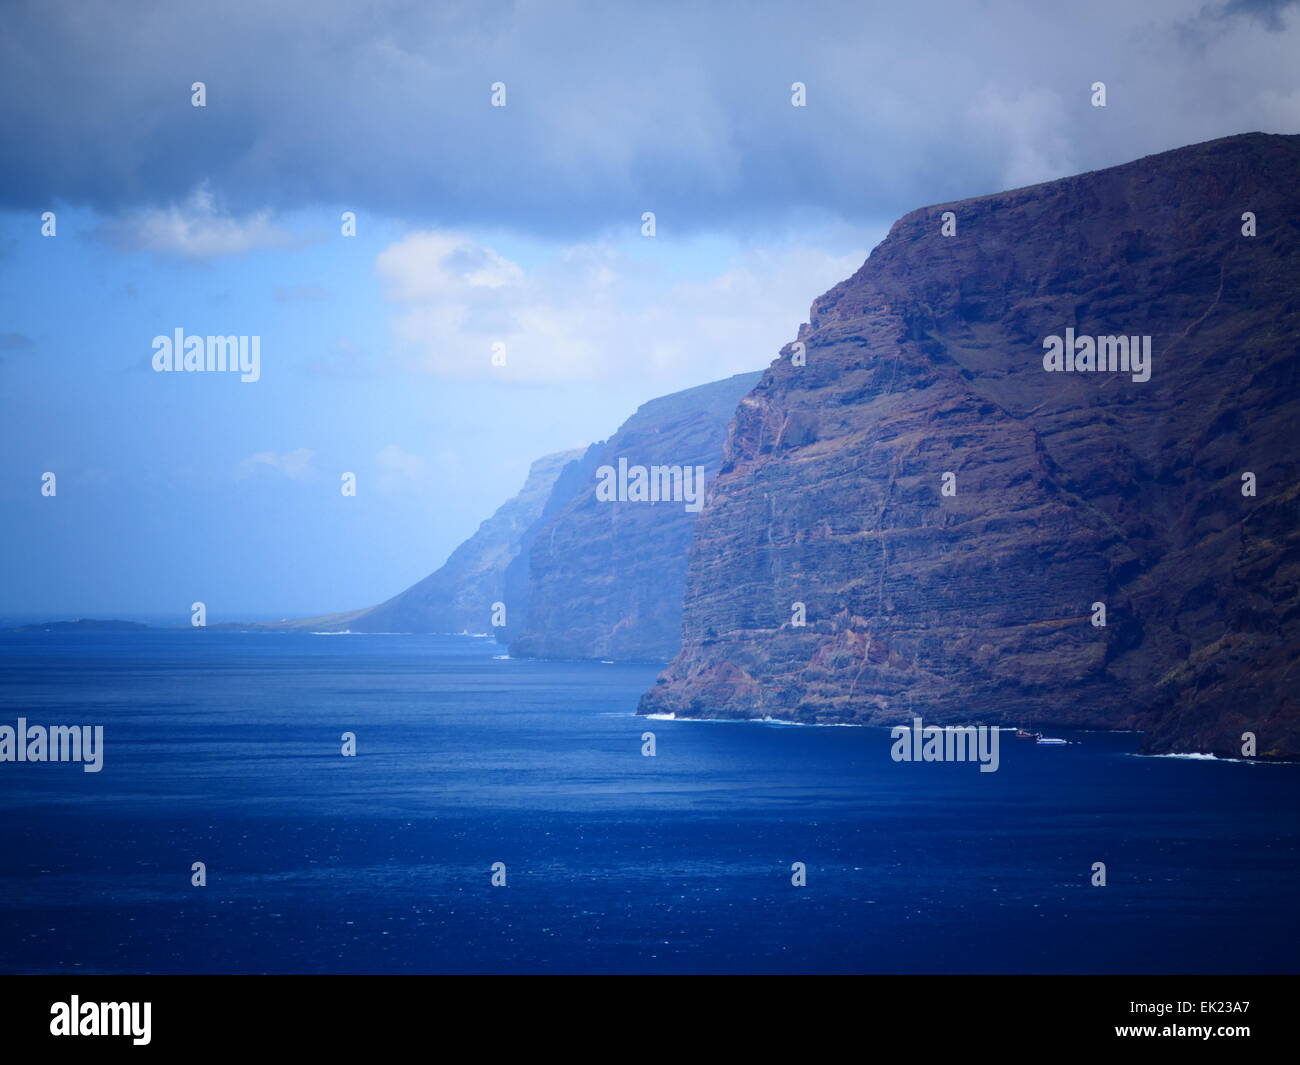 Los Gigantes Cliffs of the Giants n Puerto Santiago Tenerife island Canary islands Spain Stock Photo